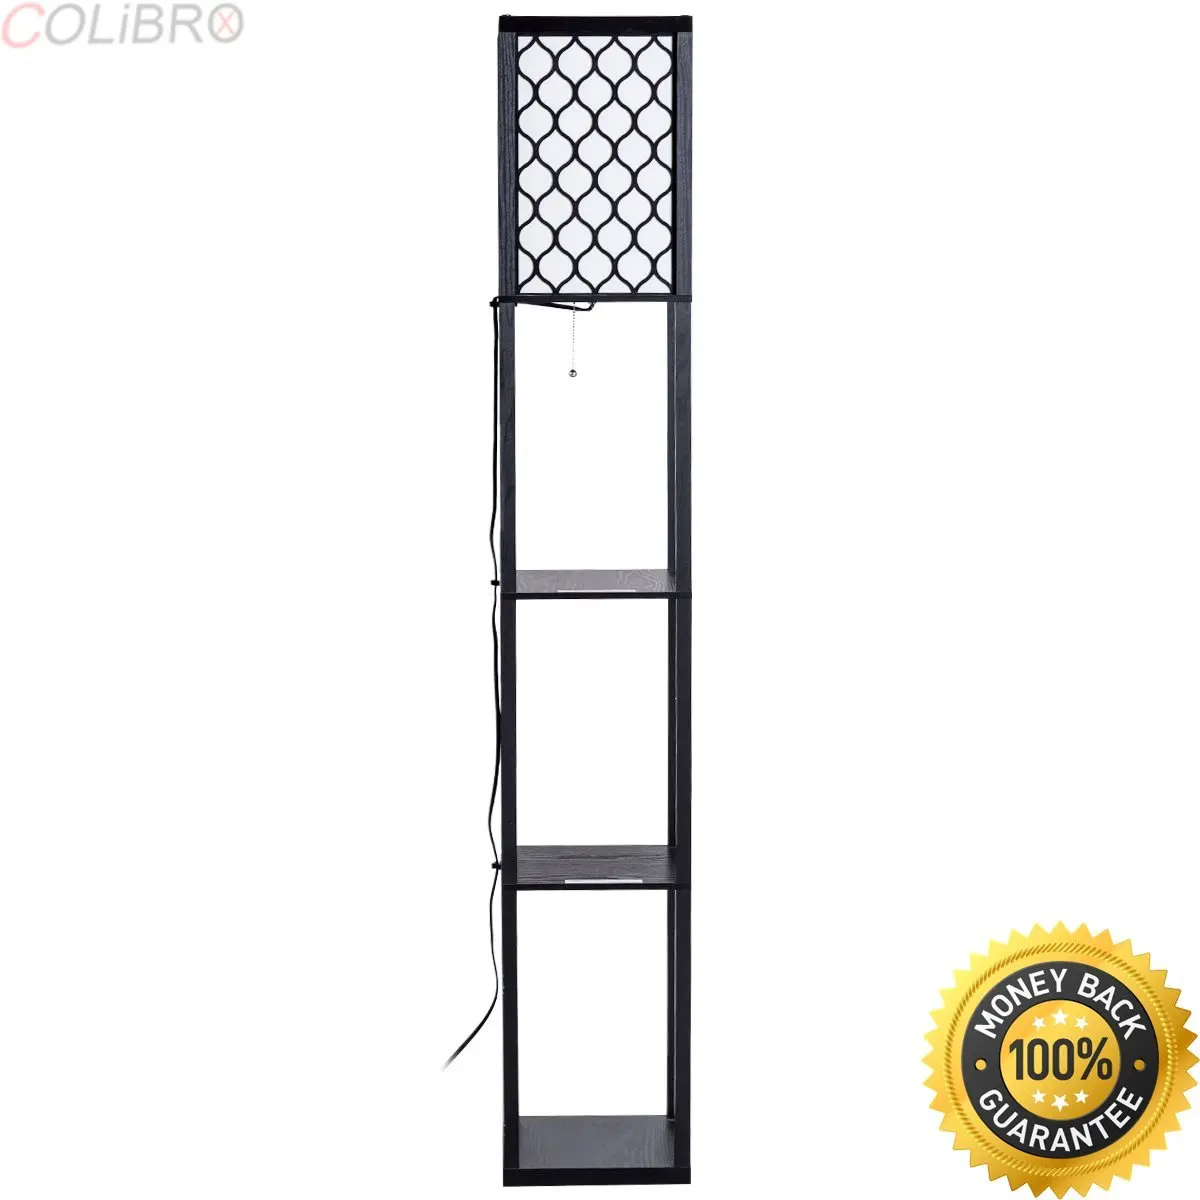 Cheap Floor Lamp With Shelves Find Floor Lamp With Shelves Deals